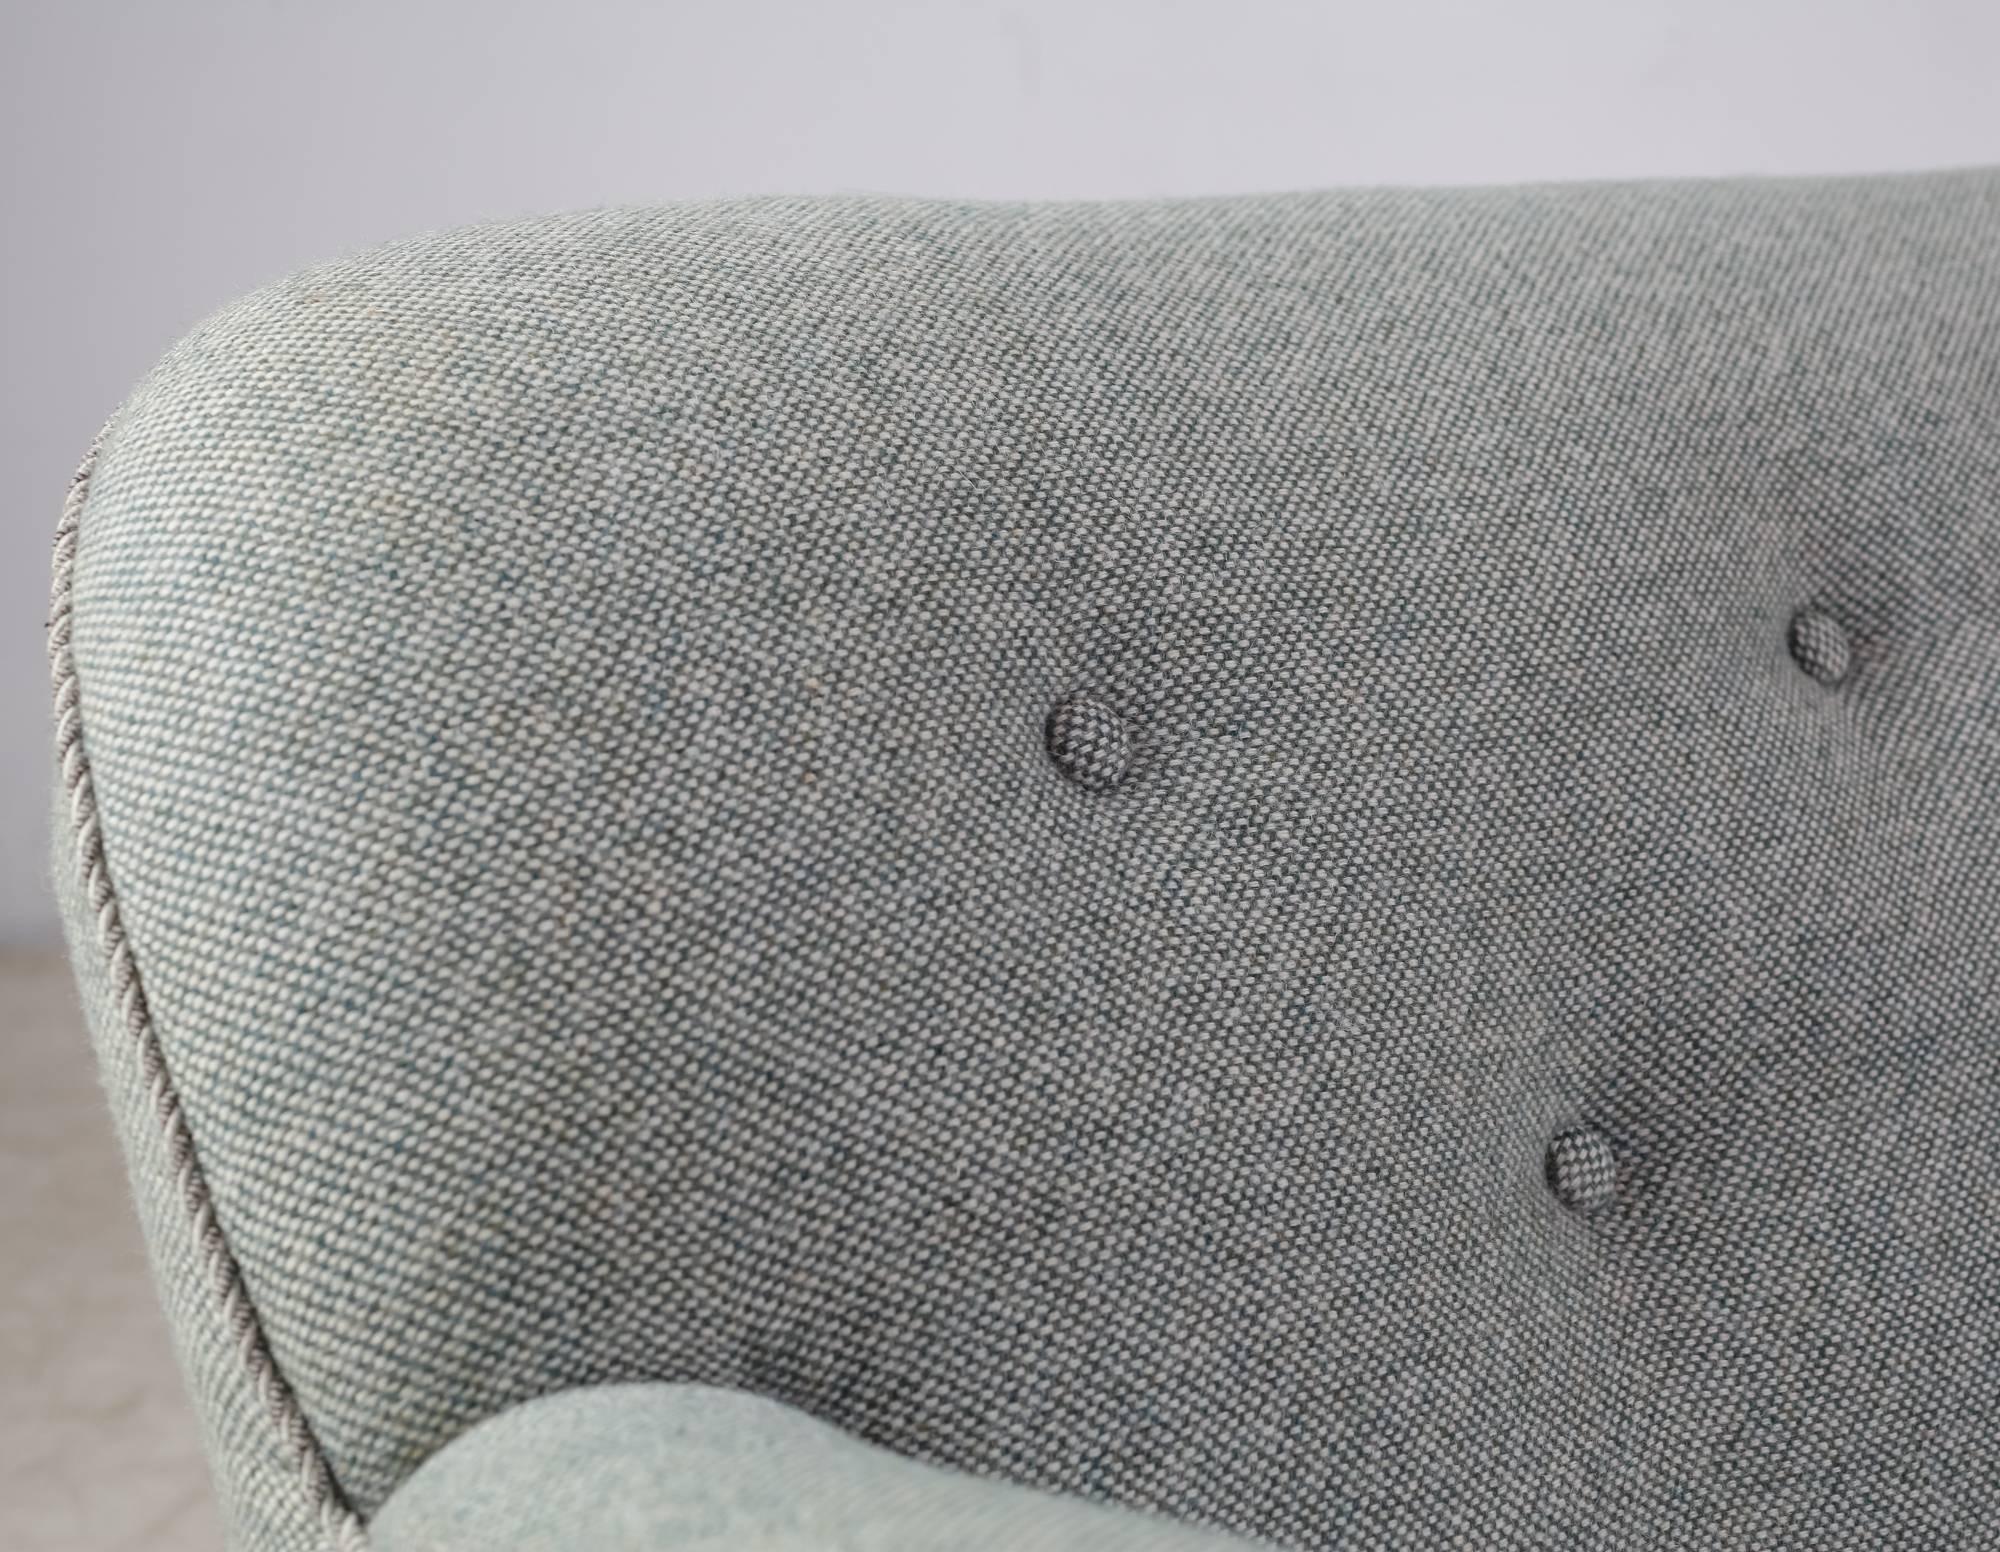 Curved Three-Seat Sofa with Light Blue Fabric Upholstery, Denmark, 1930s For Sale 2